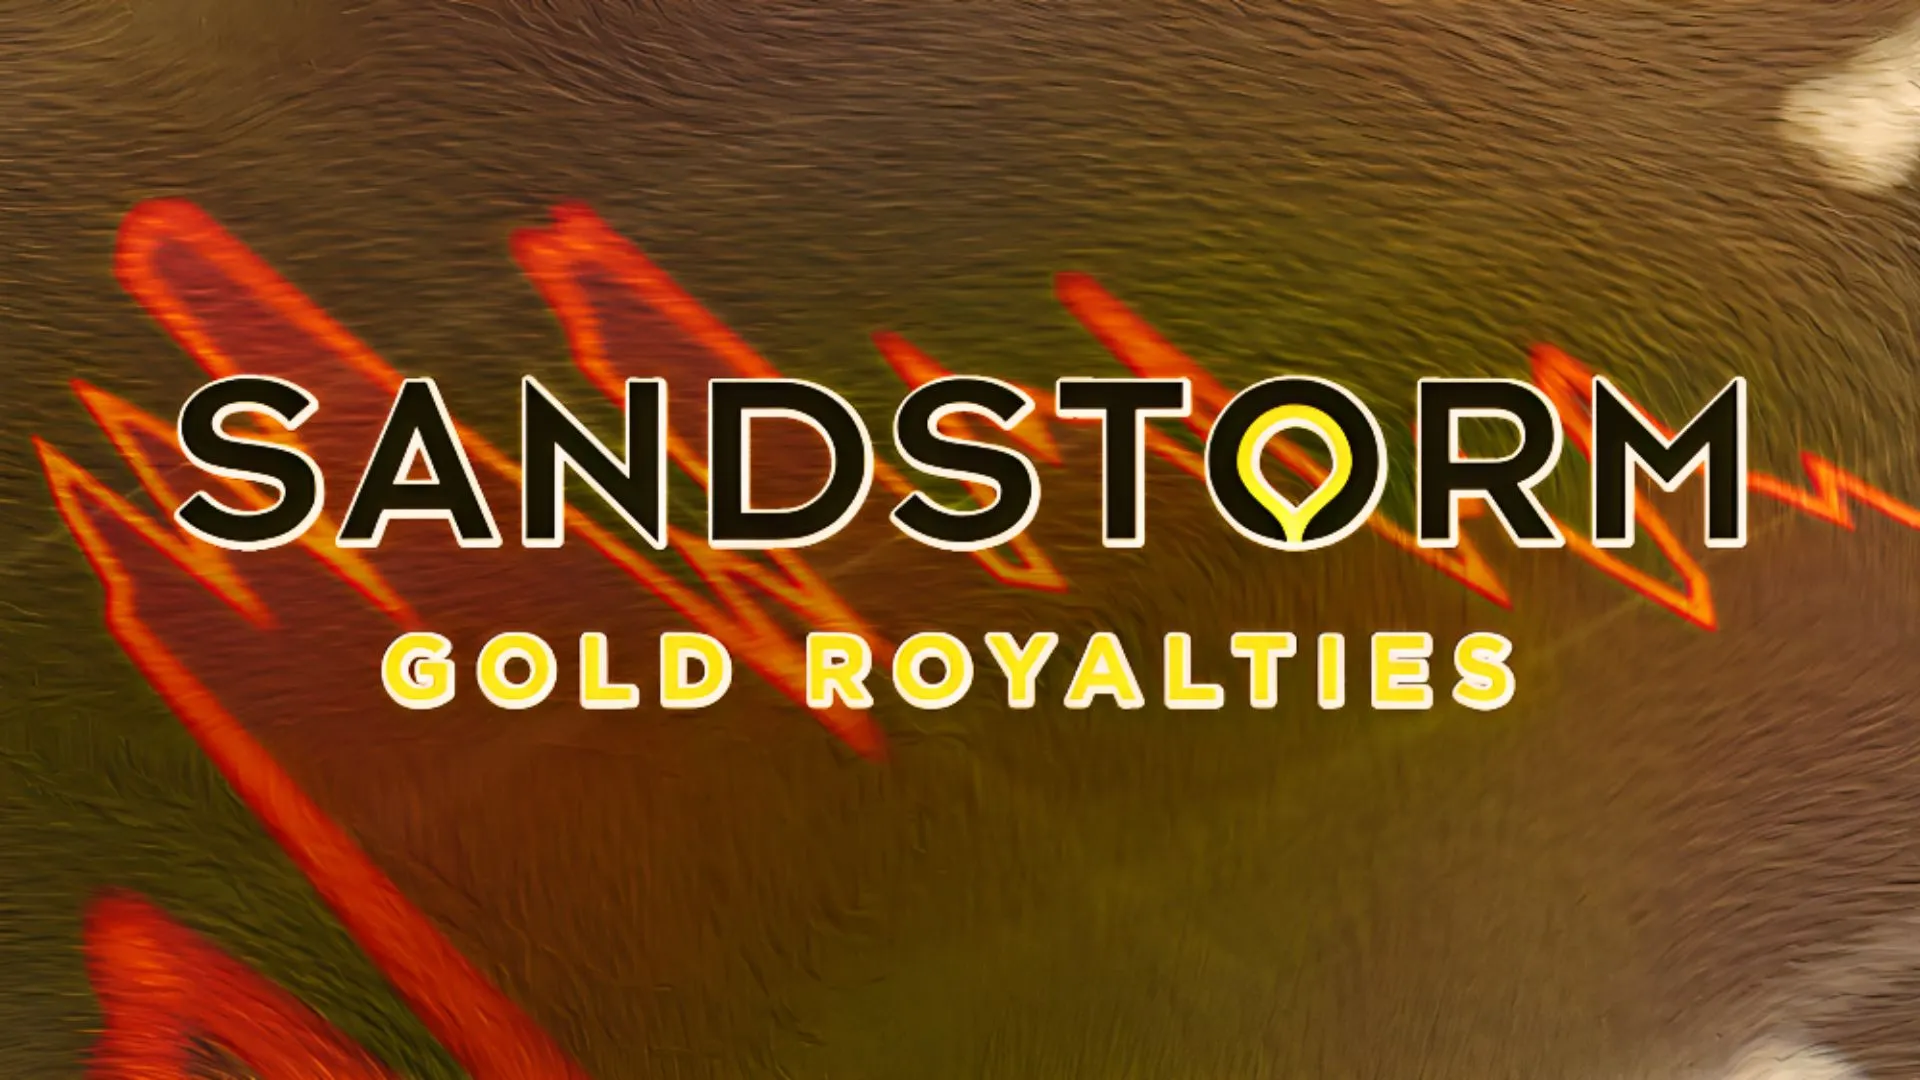 Sandstorm Gold Ltd. (NYSE: SAND): Will the SAND stock price defend $5?